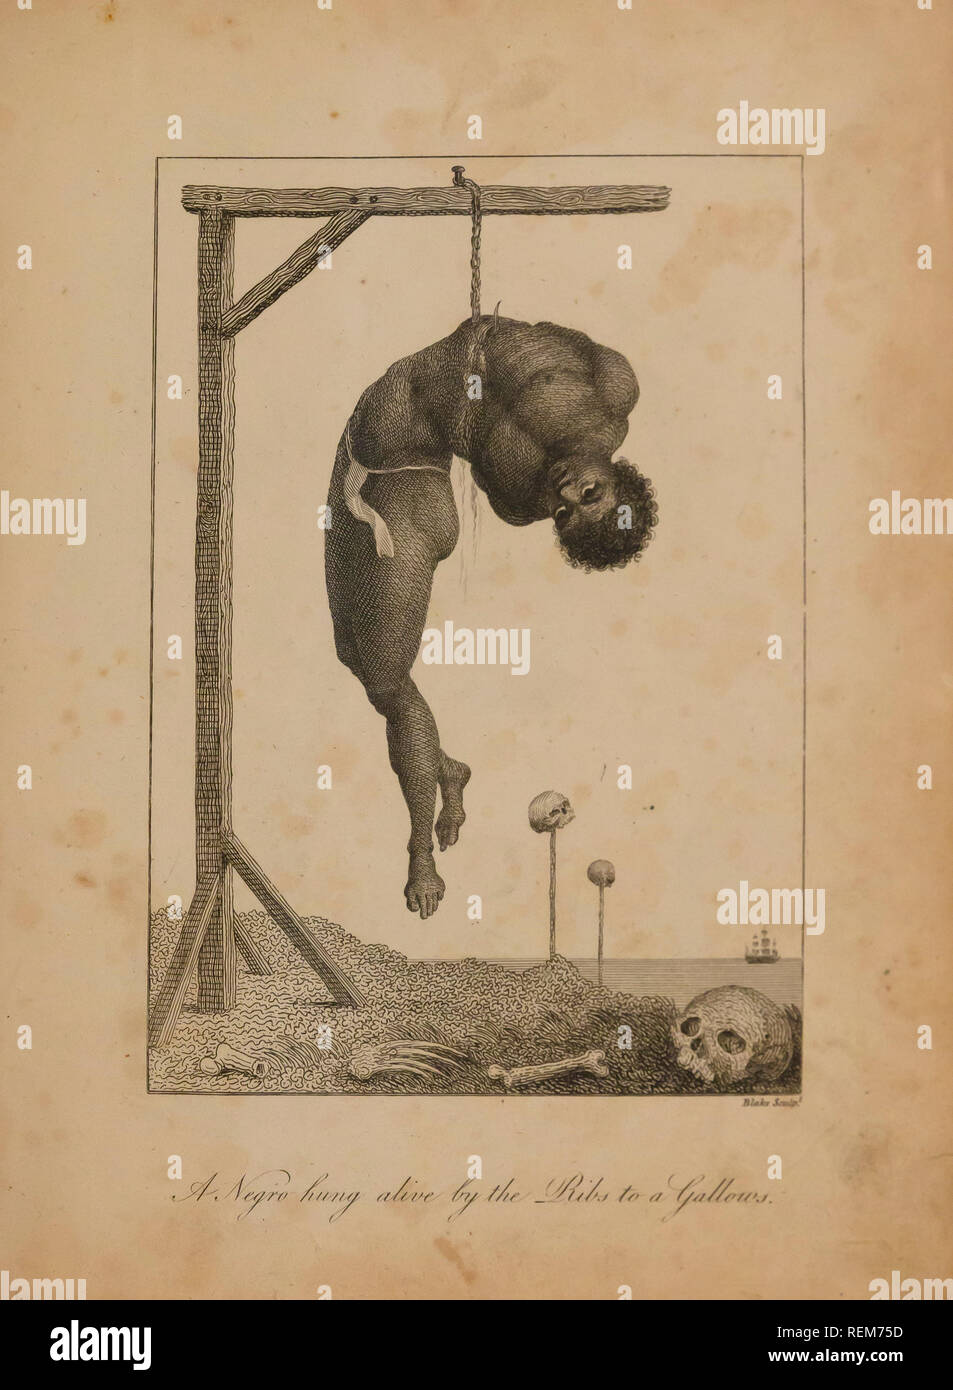 A negro hung alive by the Ribs to a Gallows, Slave Hanging by the Ribs, William Blake, 1796, Stock Photo